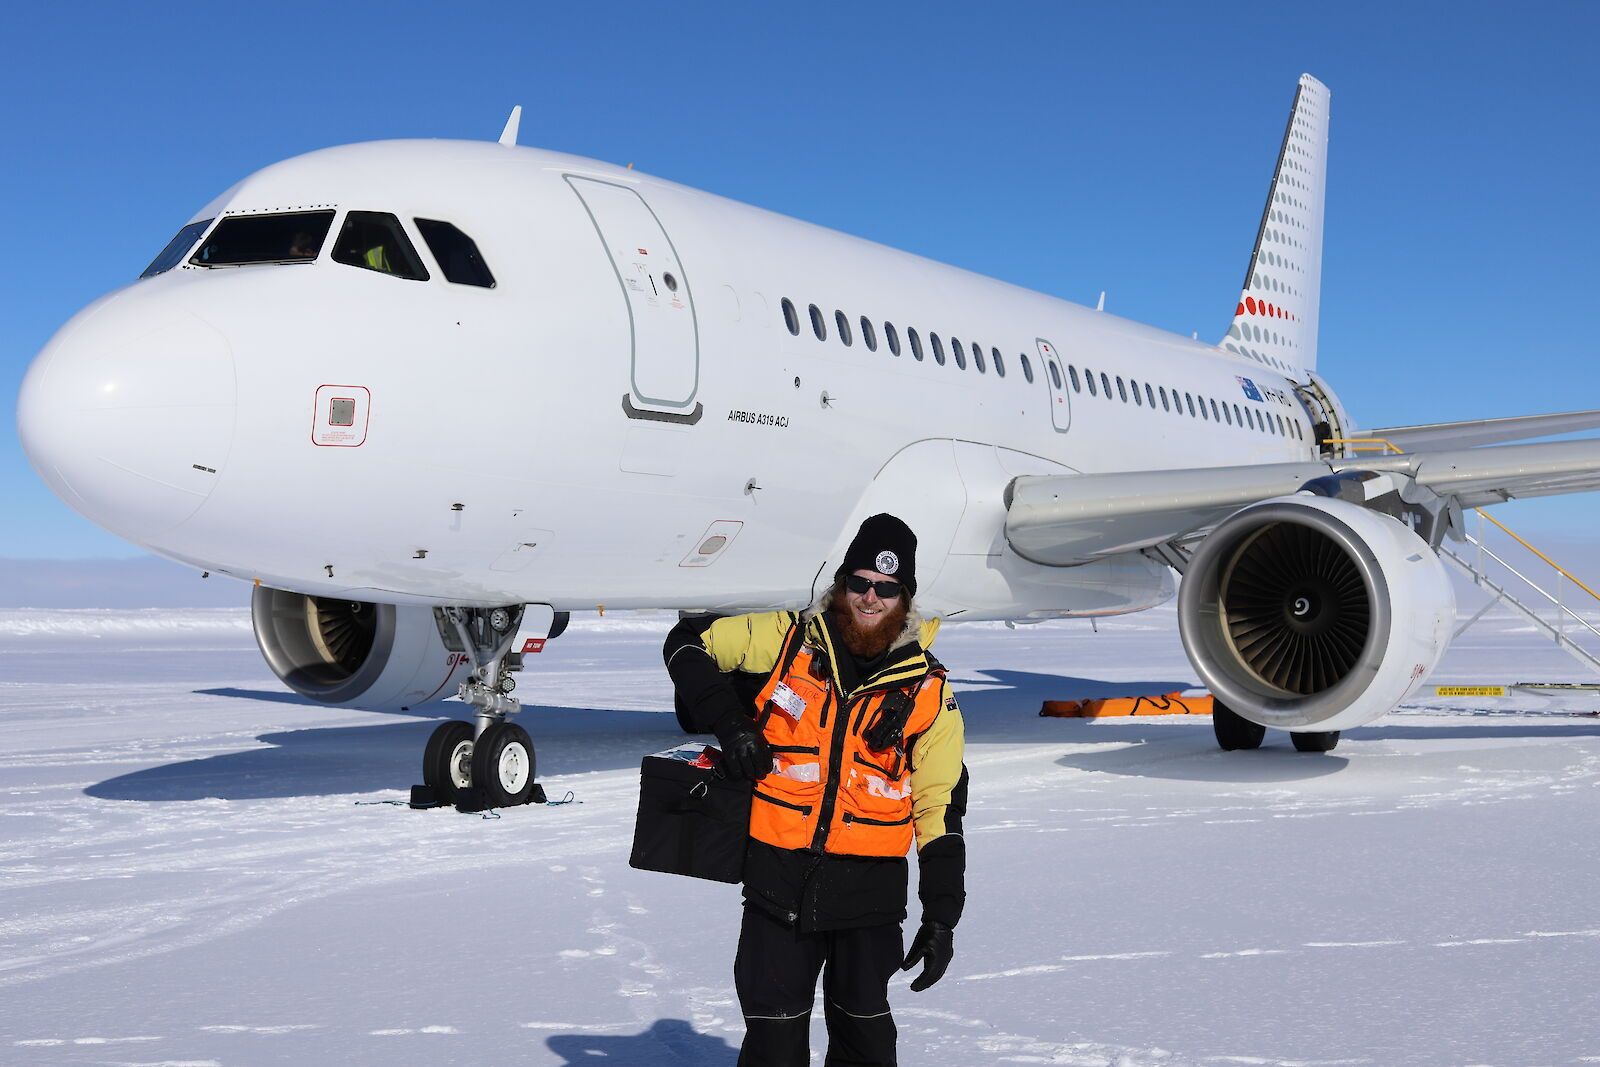 A worker standing in front of an aircraft on the ground in Antarctica.